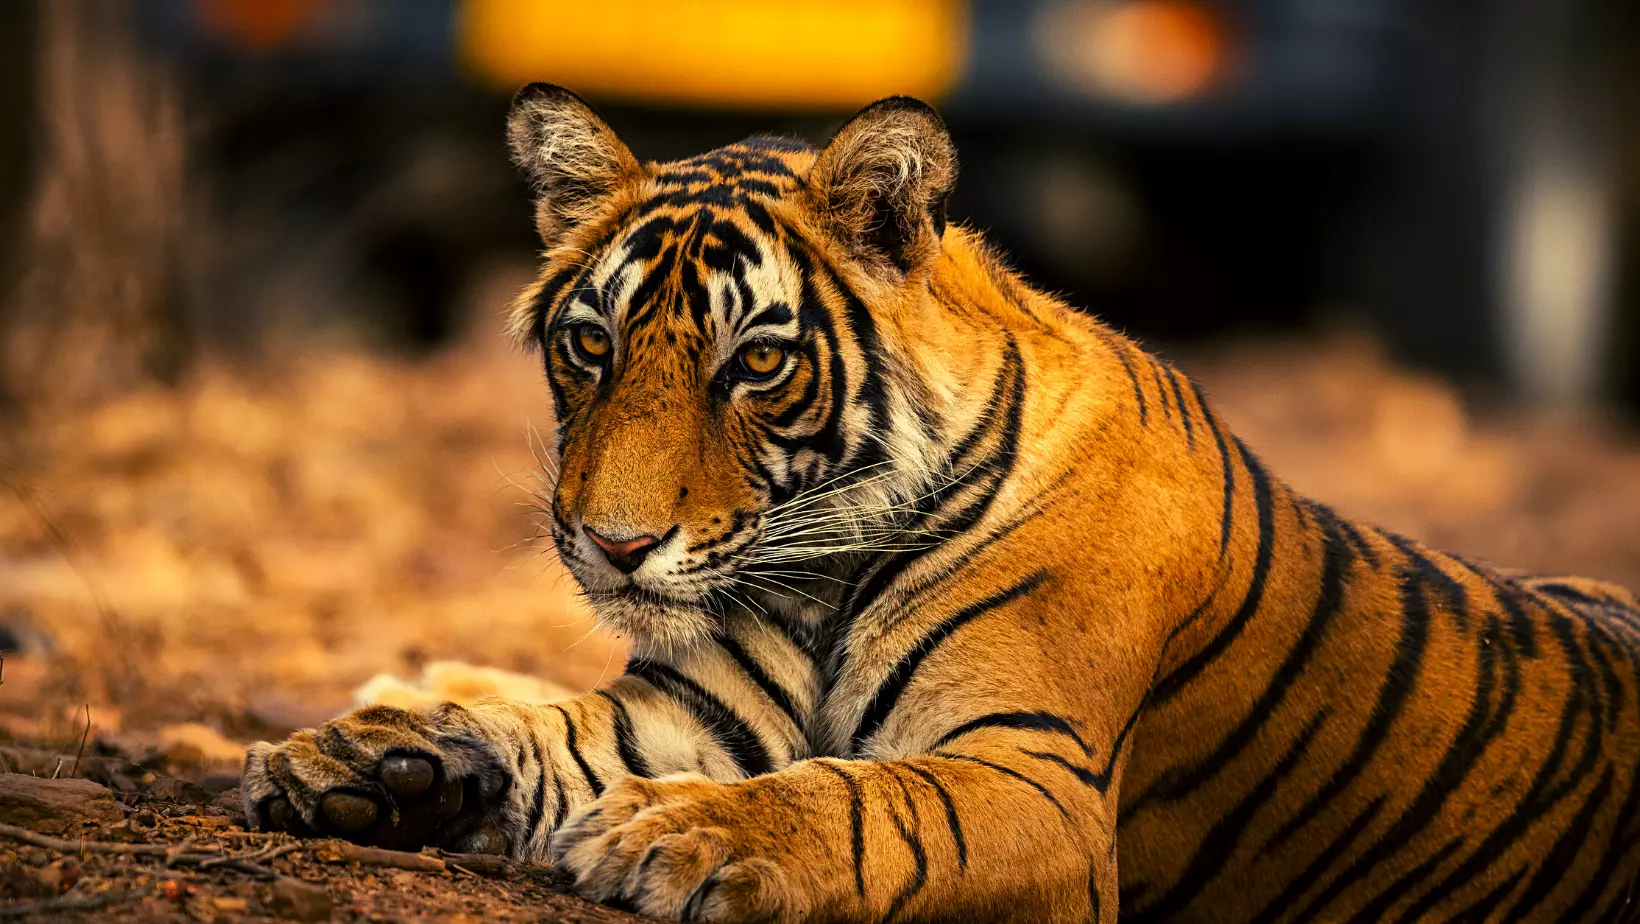 India Tigers Tour with Bird Paradise and Heritage